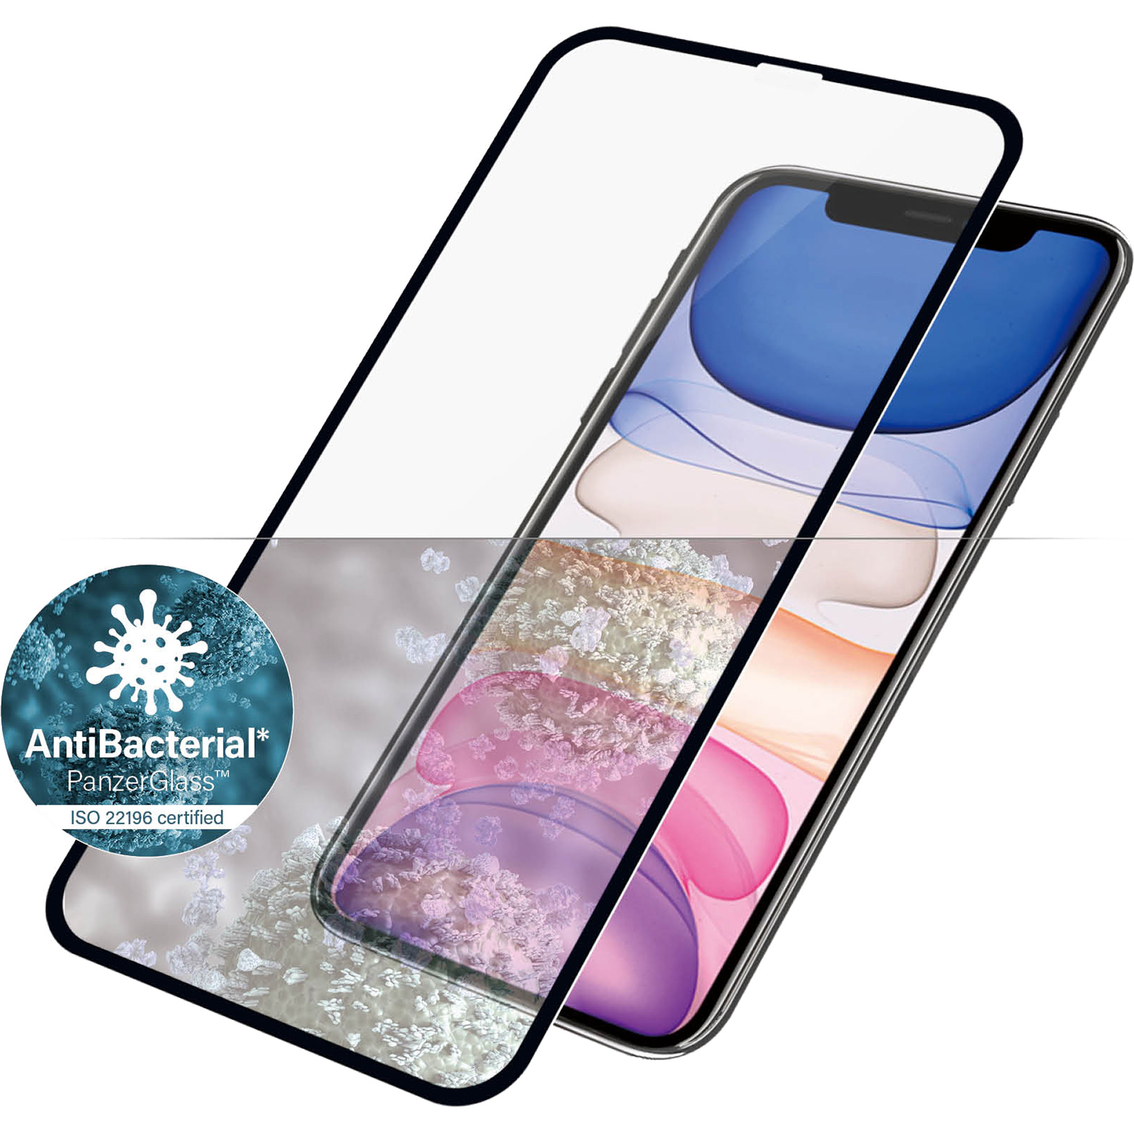 Panzer Glass Screen Protector for iPhone Xr and iPhone 11 - Image 4 of 6